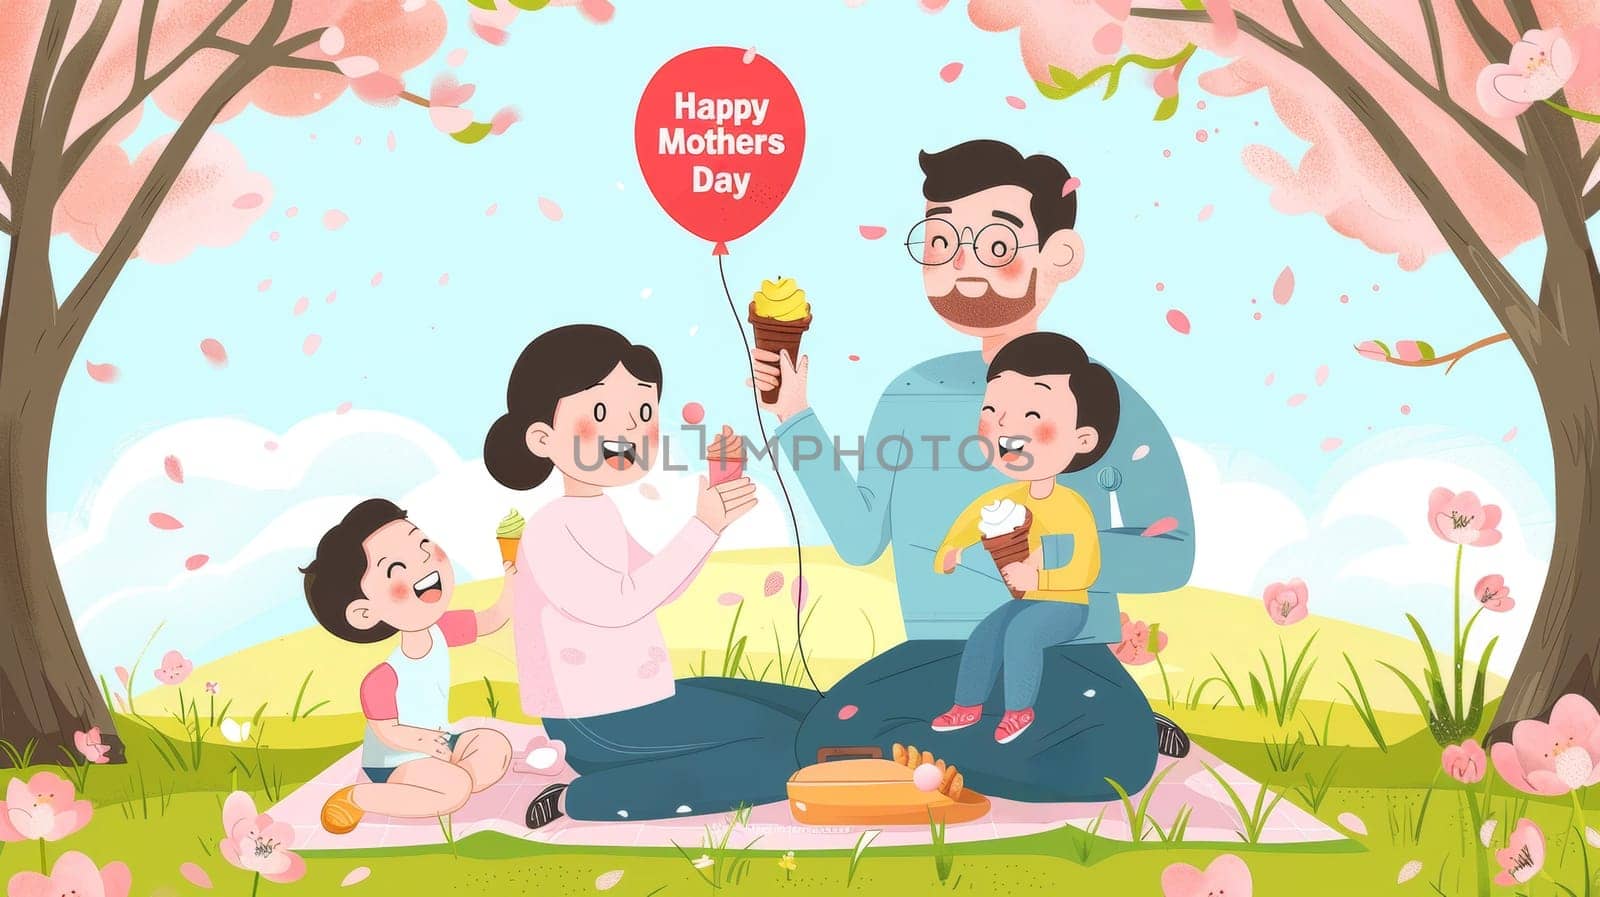 A joyful cartoon family celebrates Mothers Day outdoors, surrounded by blooming trees and petals, with children holding ice creams and a Happy Mothers Day balloon flying above. by sfinks